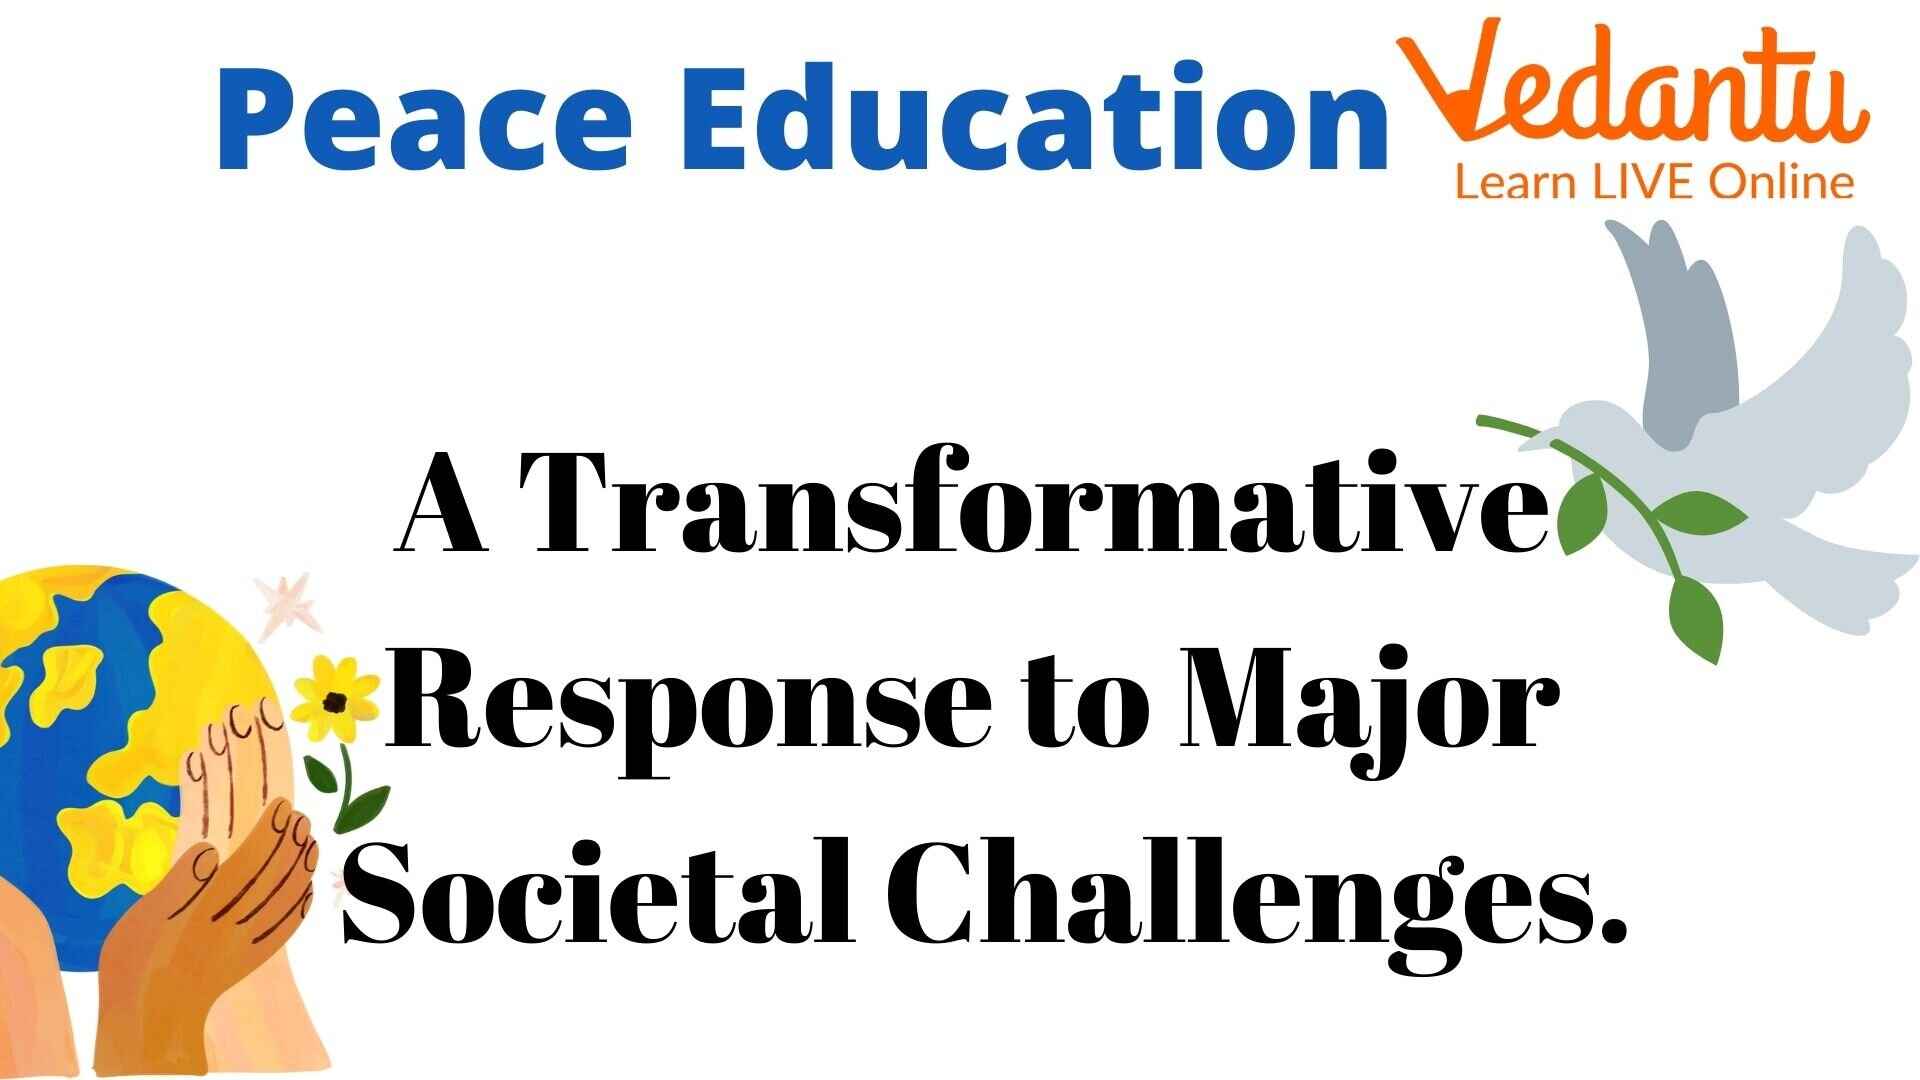 value and peace education previous year question paper